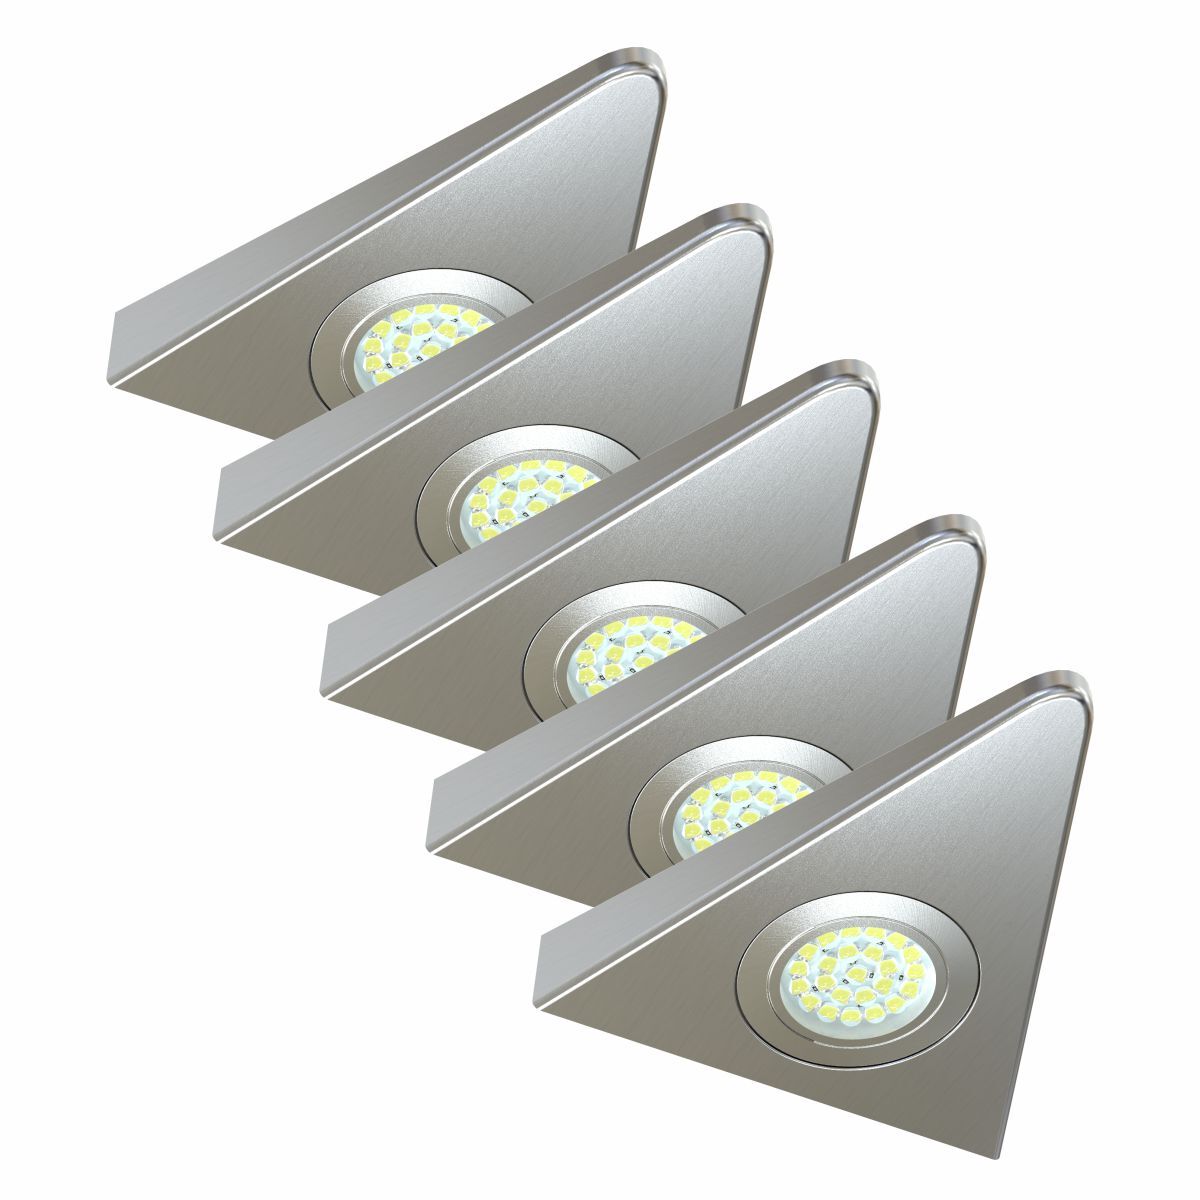 Simple Lighting Pack of 5, Super-slim, High Power, 1.8w LED, Triangle, Surface Mounted, Under Cabinet Lights